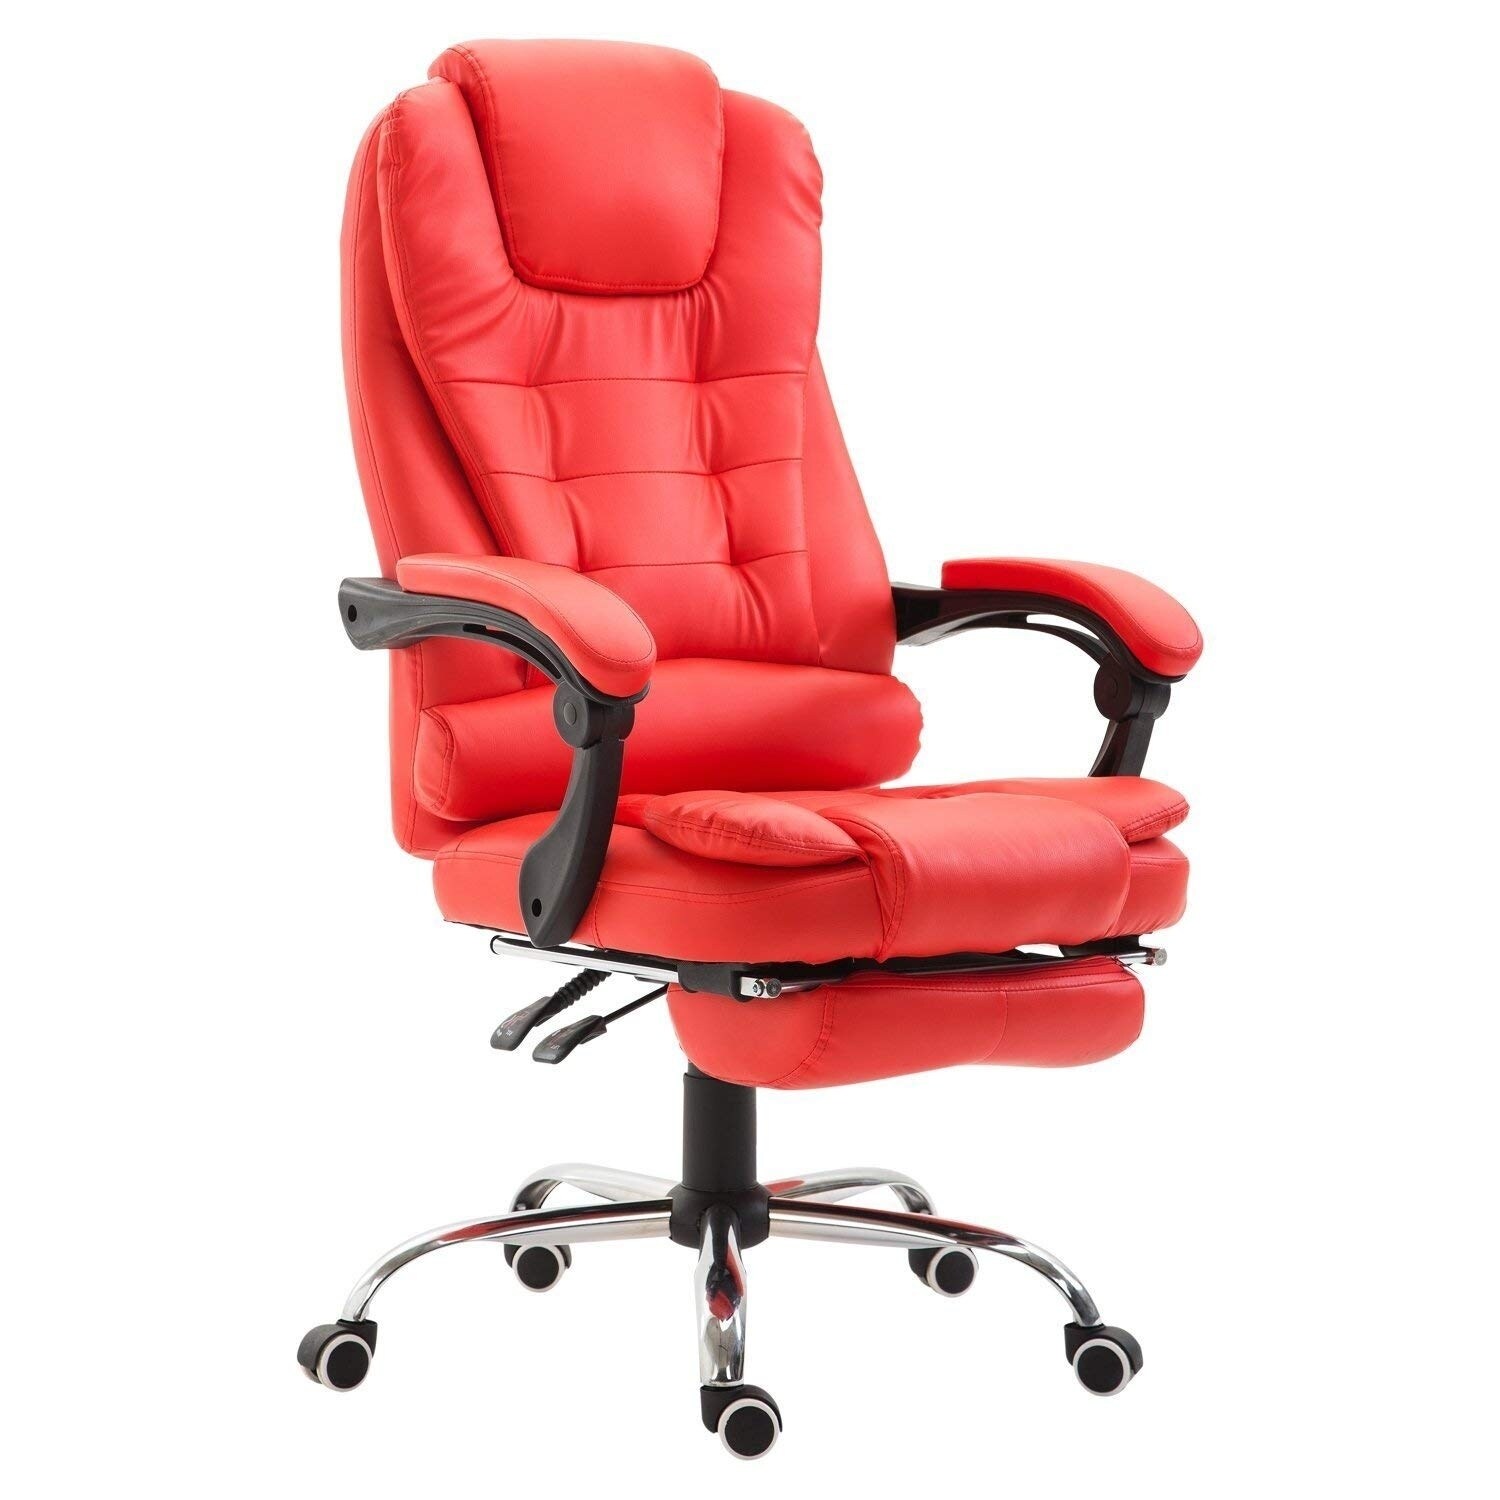 Vinsetto Red, Ergonomic Home Office Chair High Back Armchair